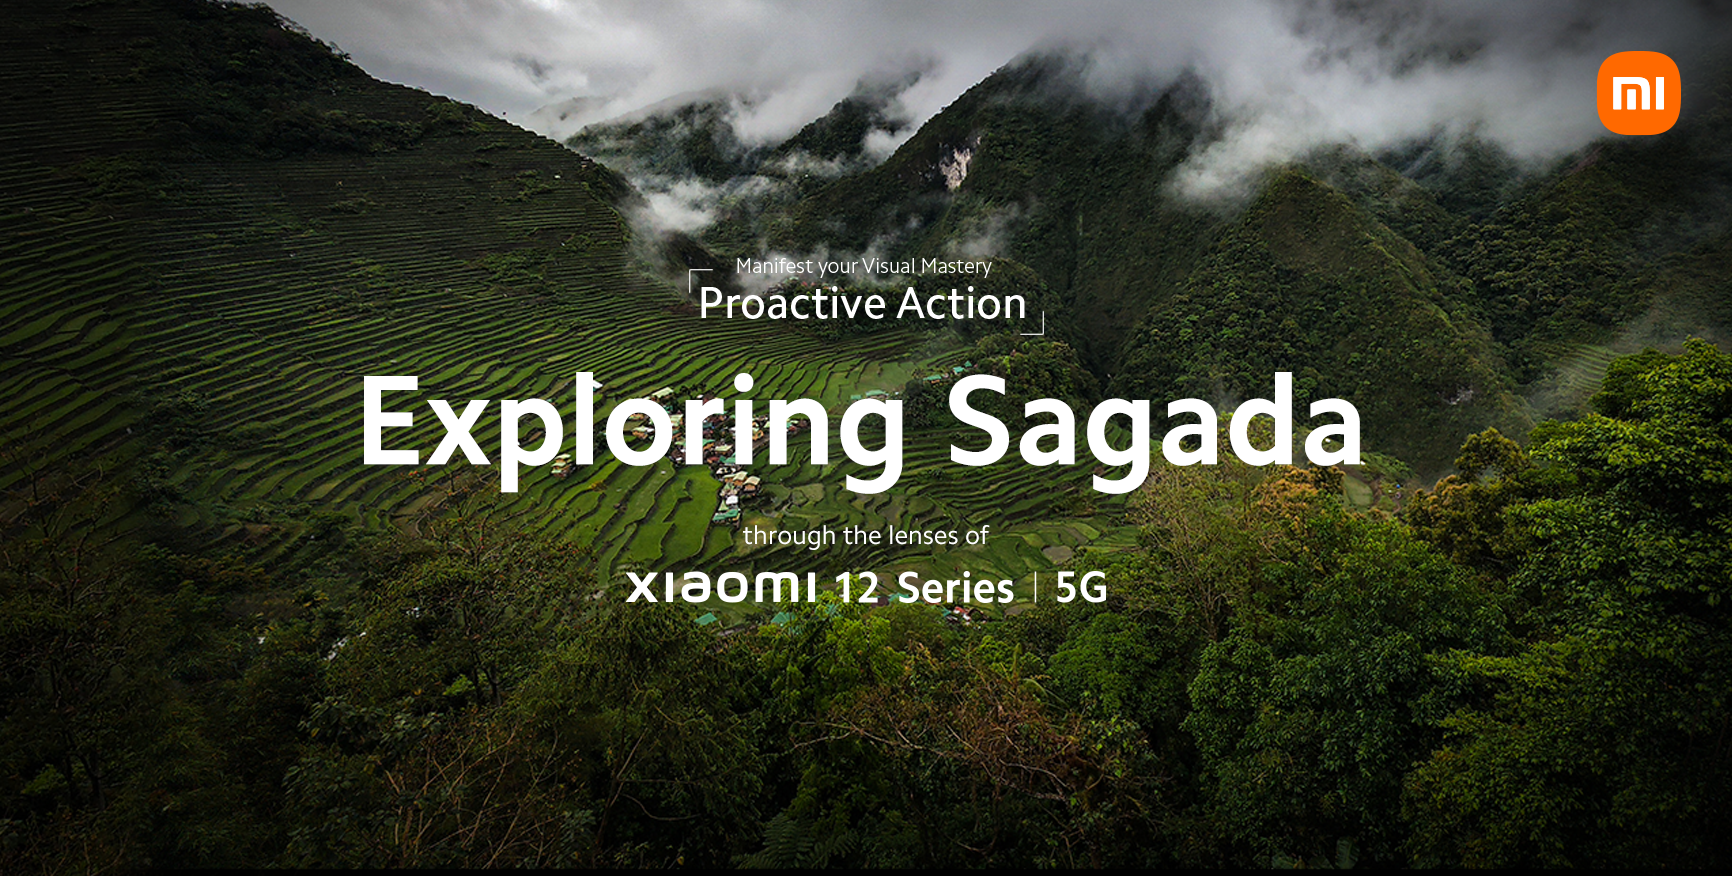 Xiaomi 12 Series x National Geographic